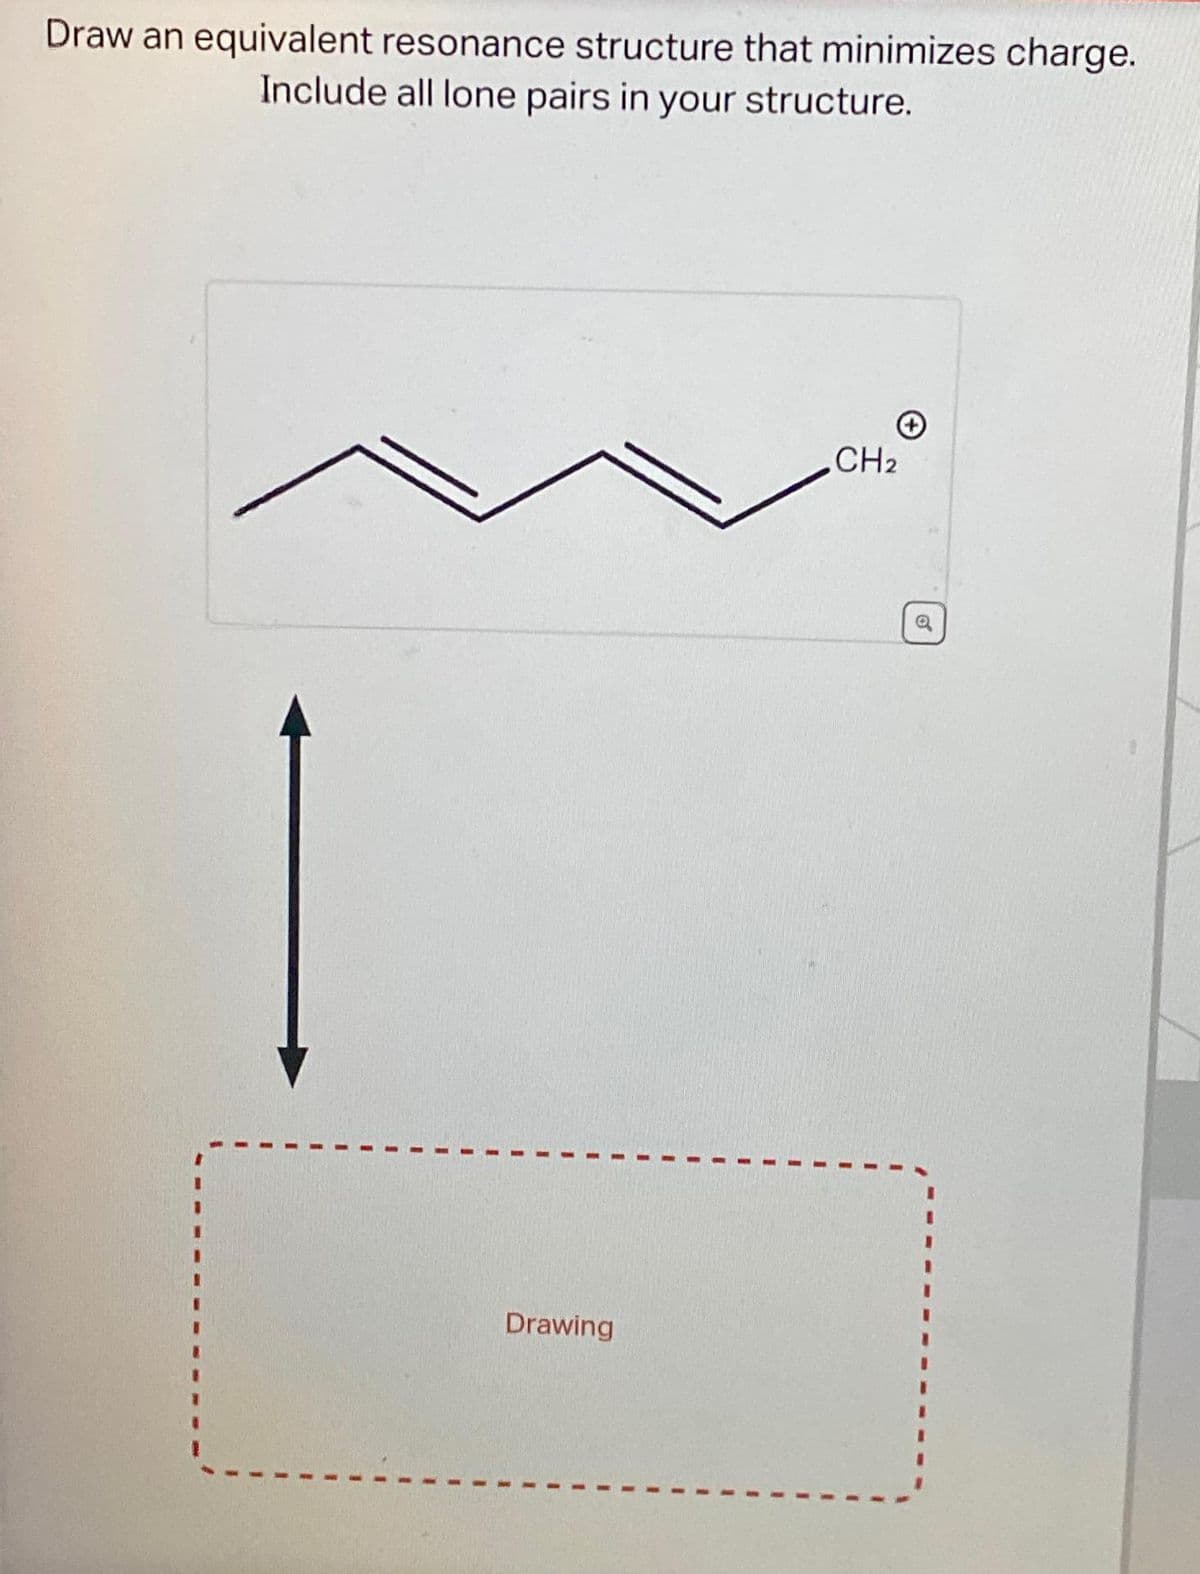 Draw an equivalent resonance structure that minimizes charge.
Include all lone pairs in your structure.
Drawing
CH2